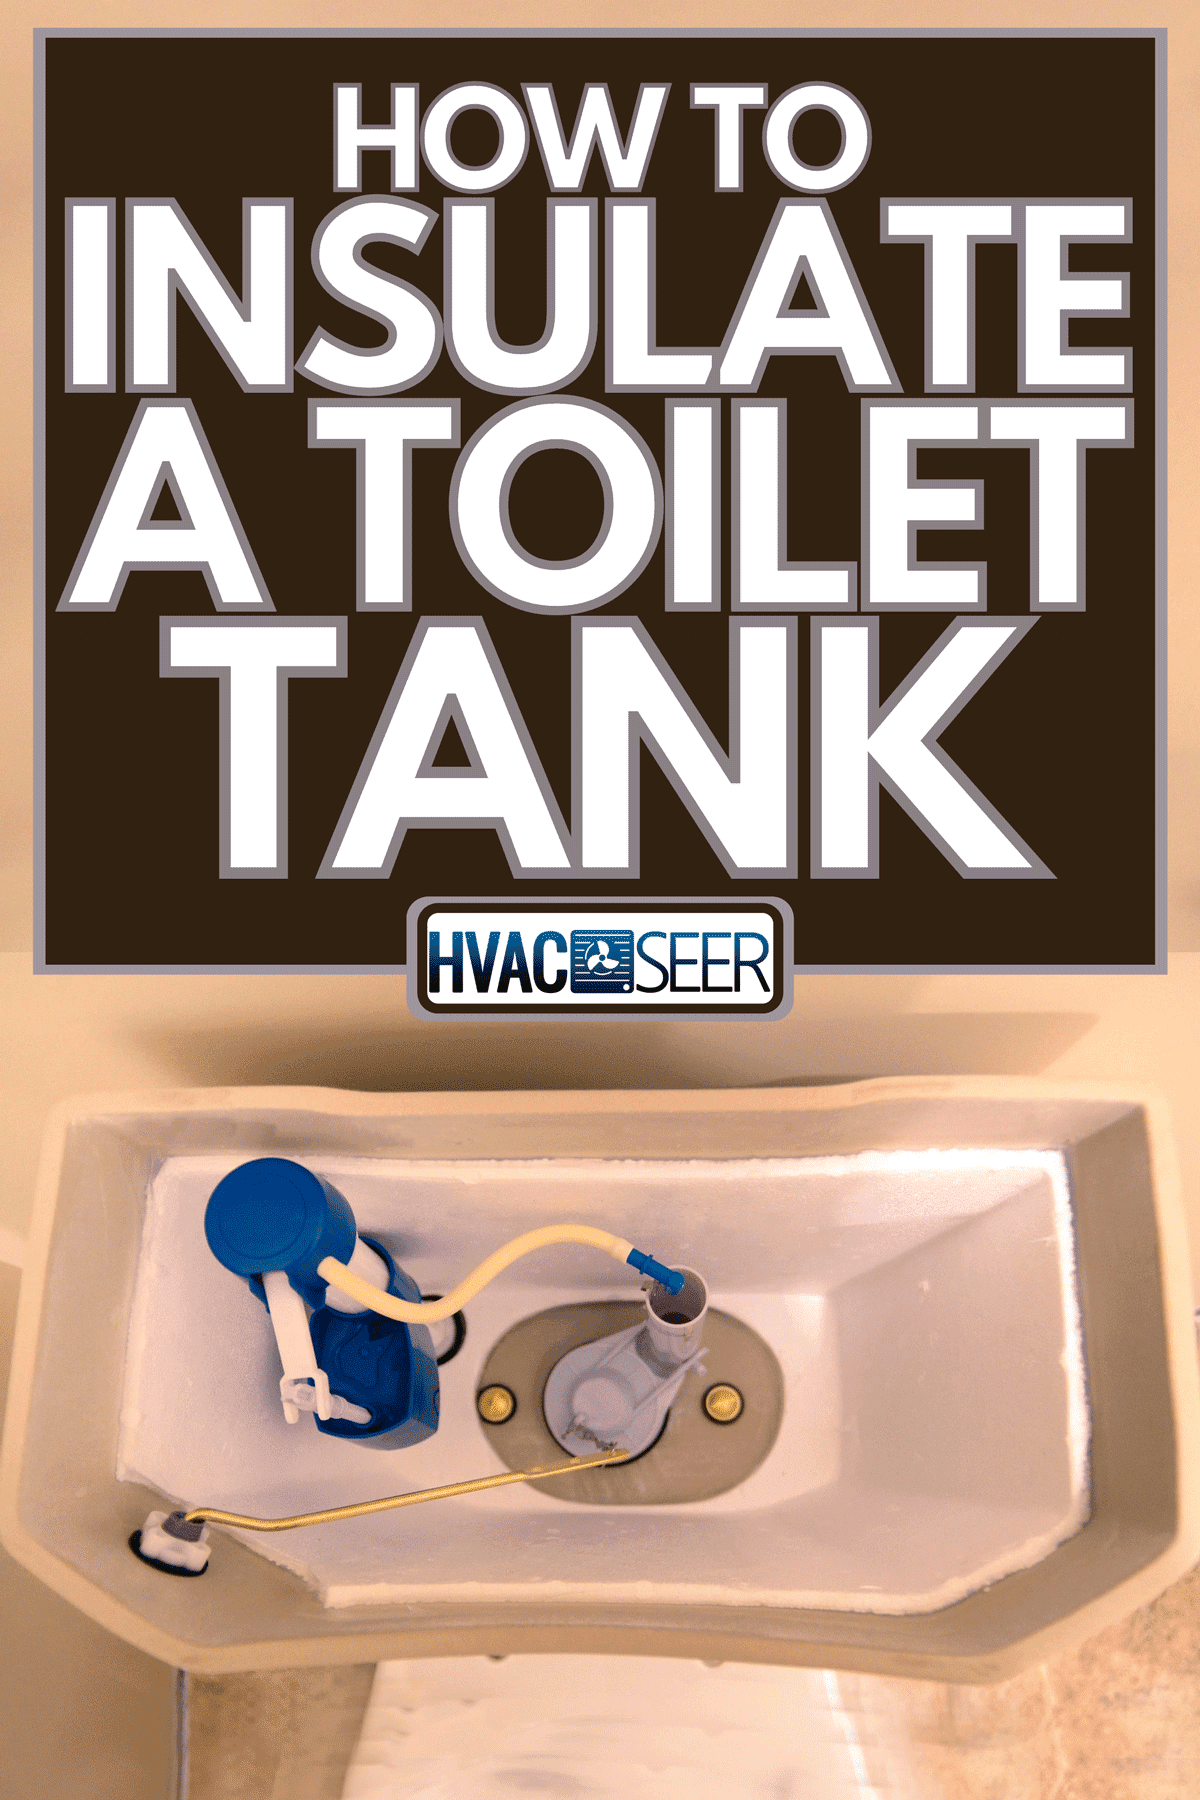 An overhead view of a brand new insulated toilet tank, How To Insulate A Toilet Tank